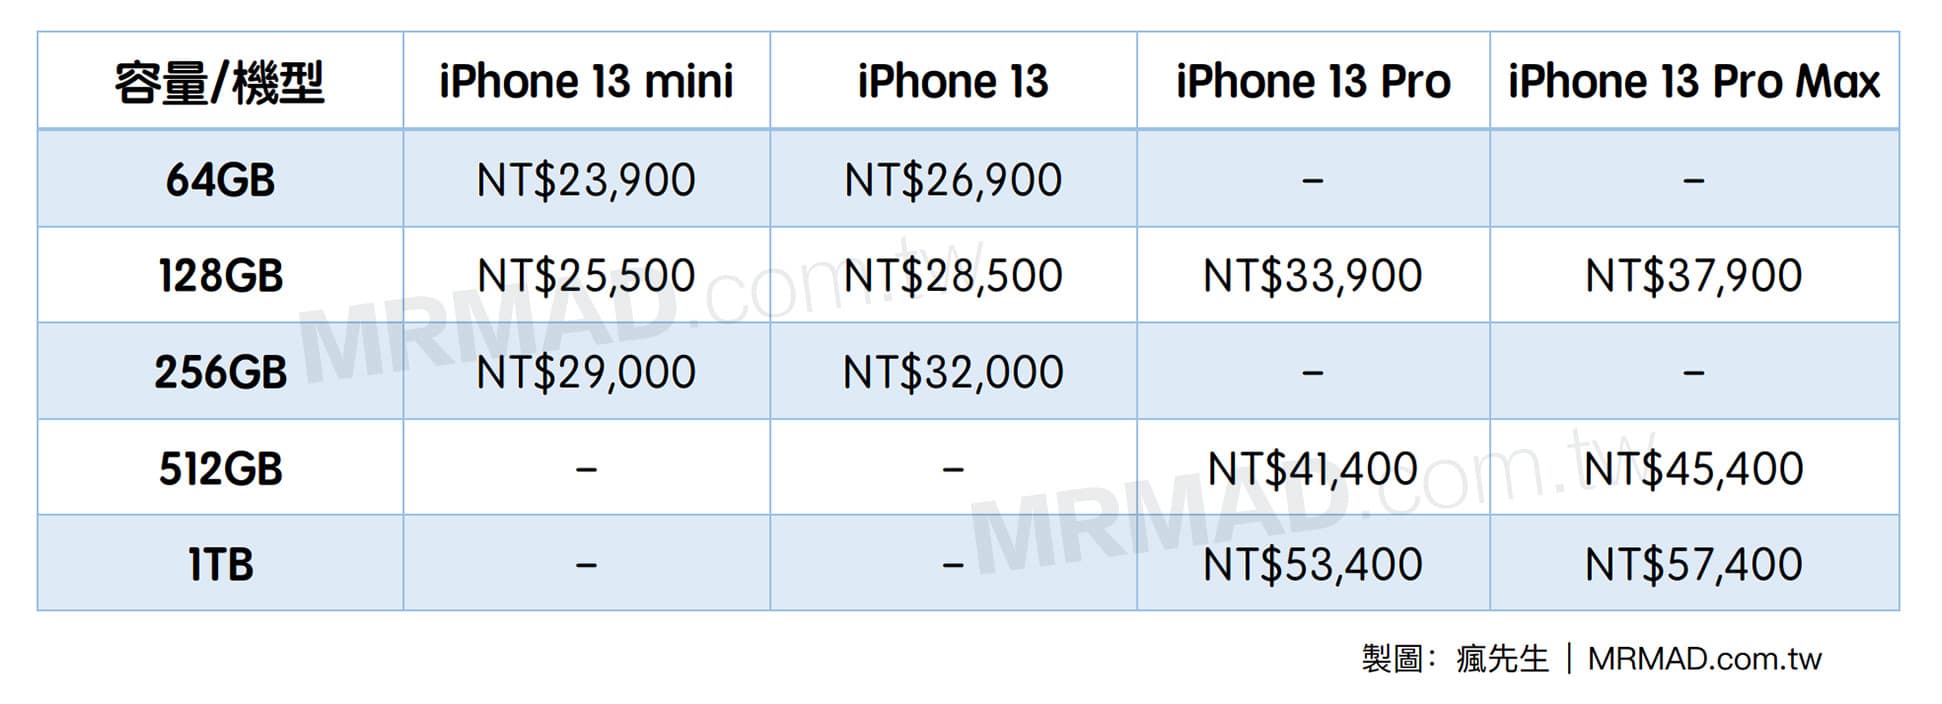 apple iphone 13 price list revealed ahead of schedule 1